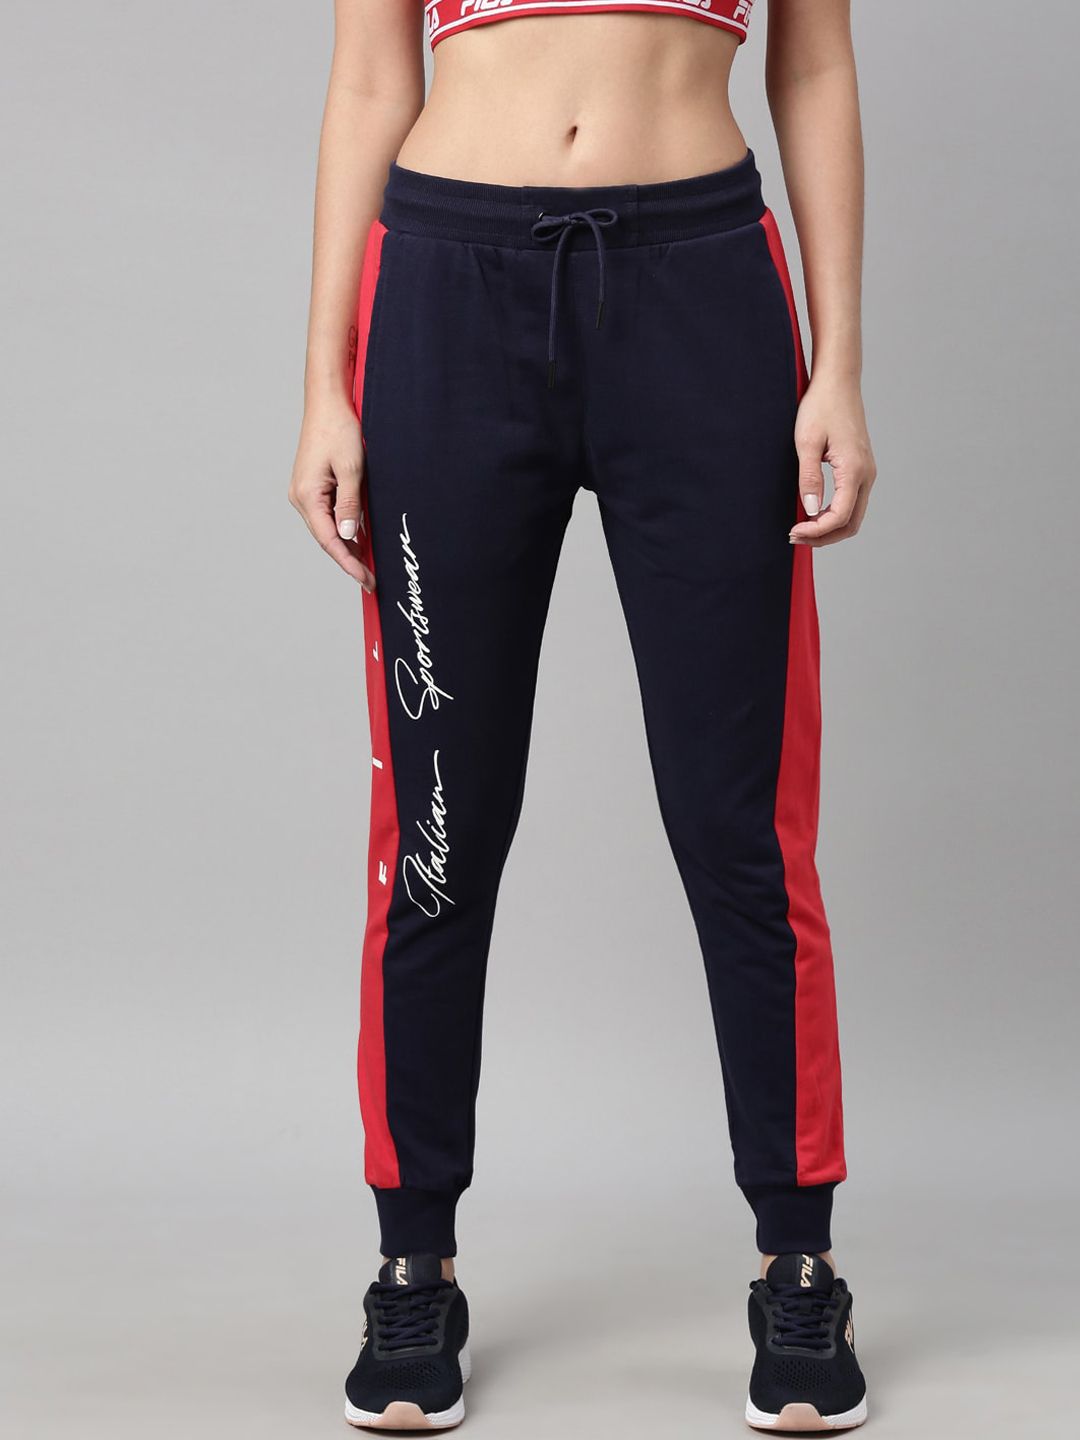 FILA Women Navy Blue & Red Colorblocked Cotton Joggers Price in India